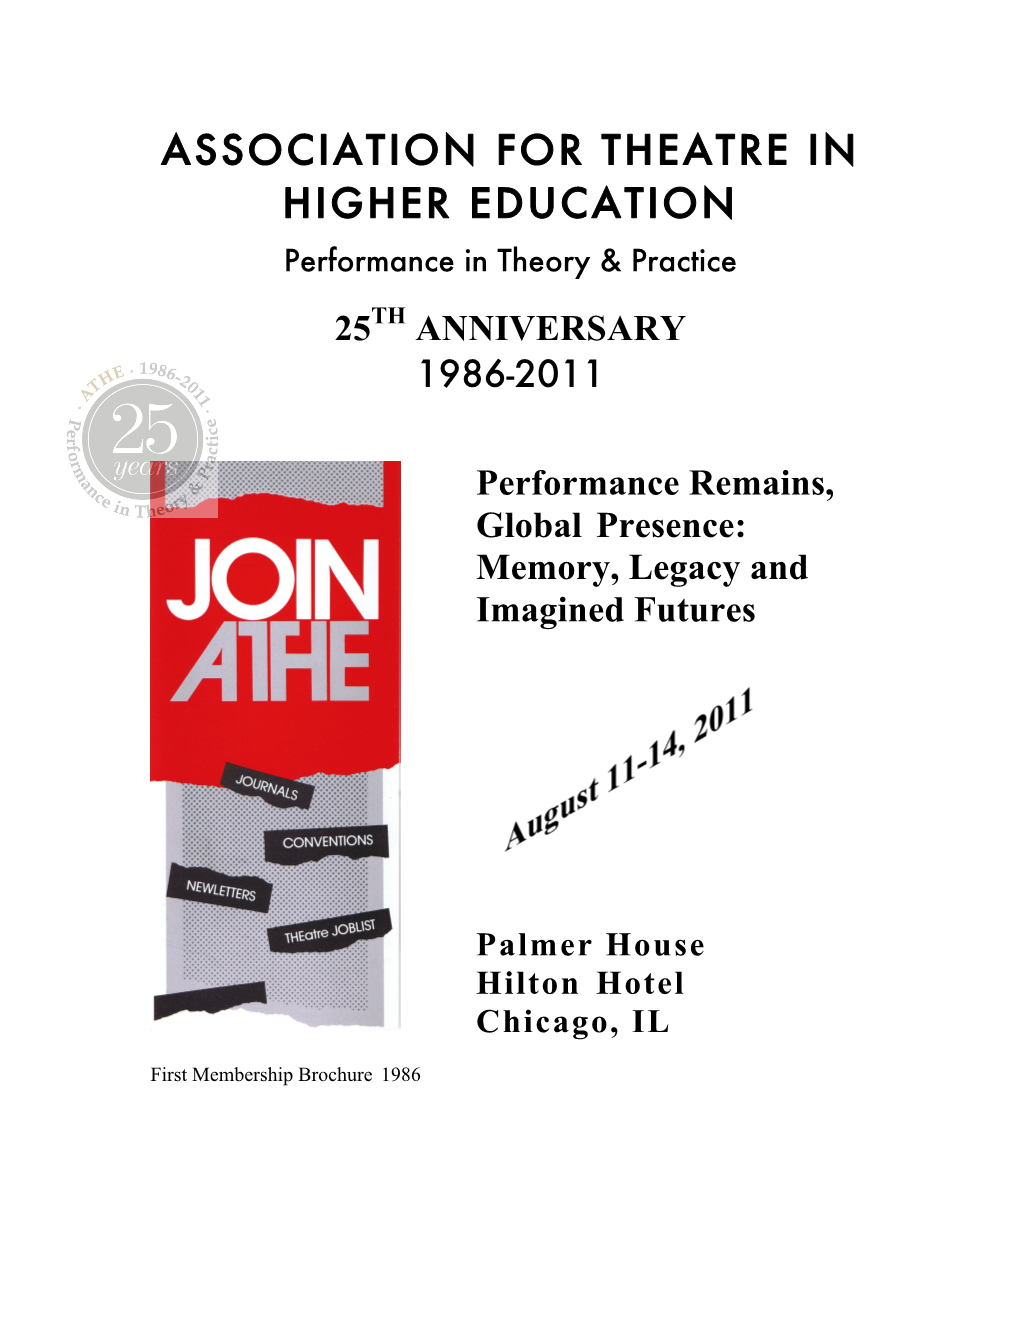 Association for Theatre in Higher Education